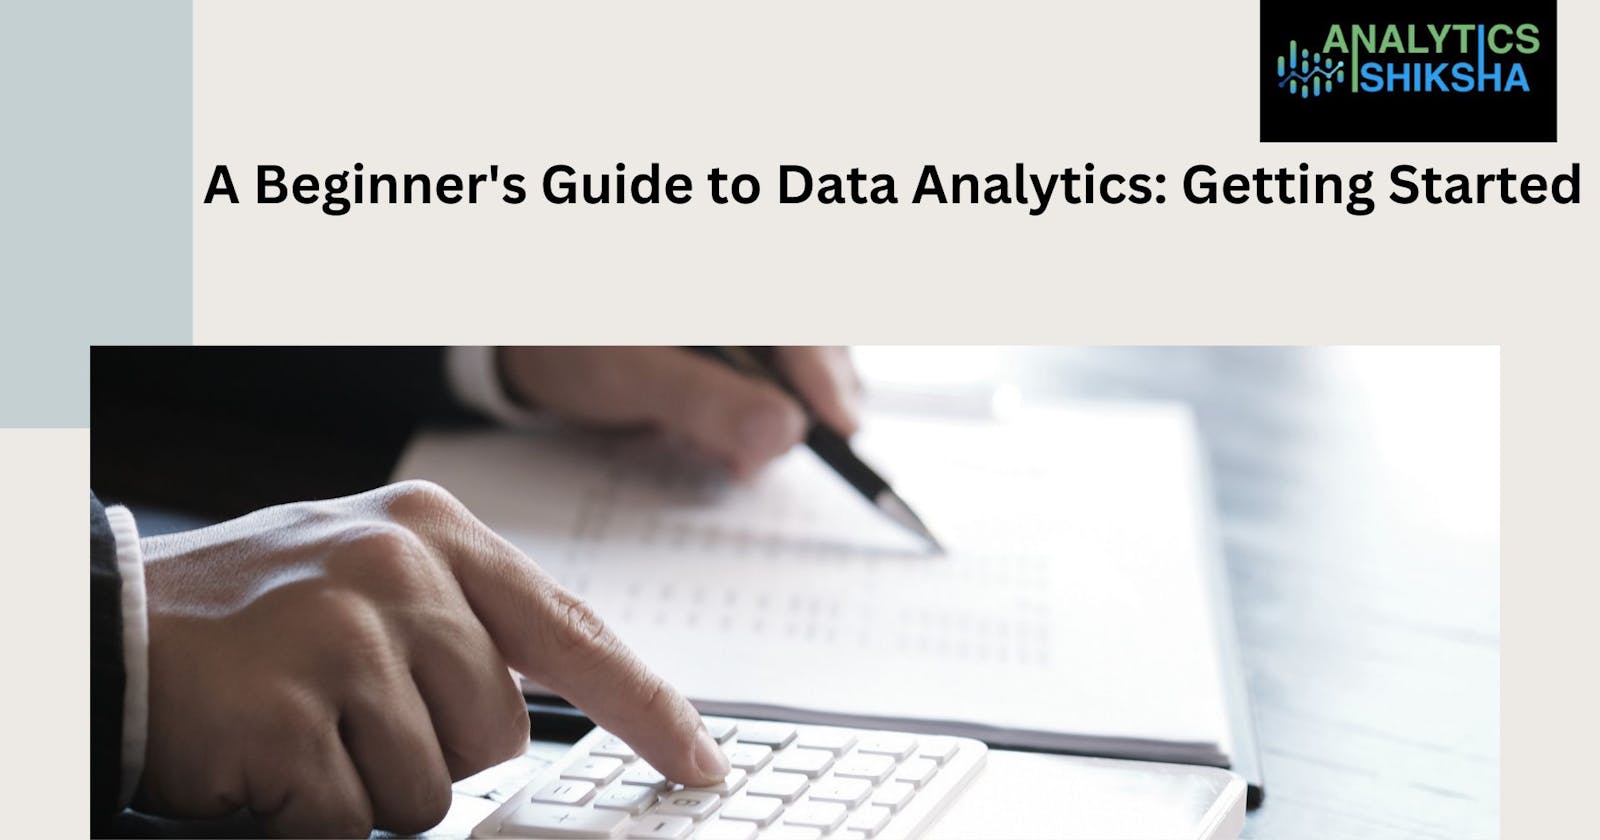 A Beginner's Guide to Data Analytics: Getting Started